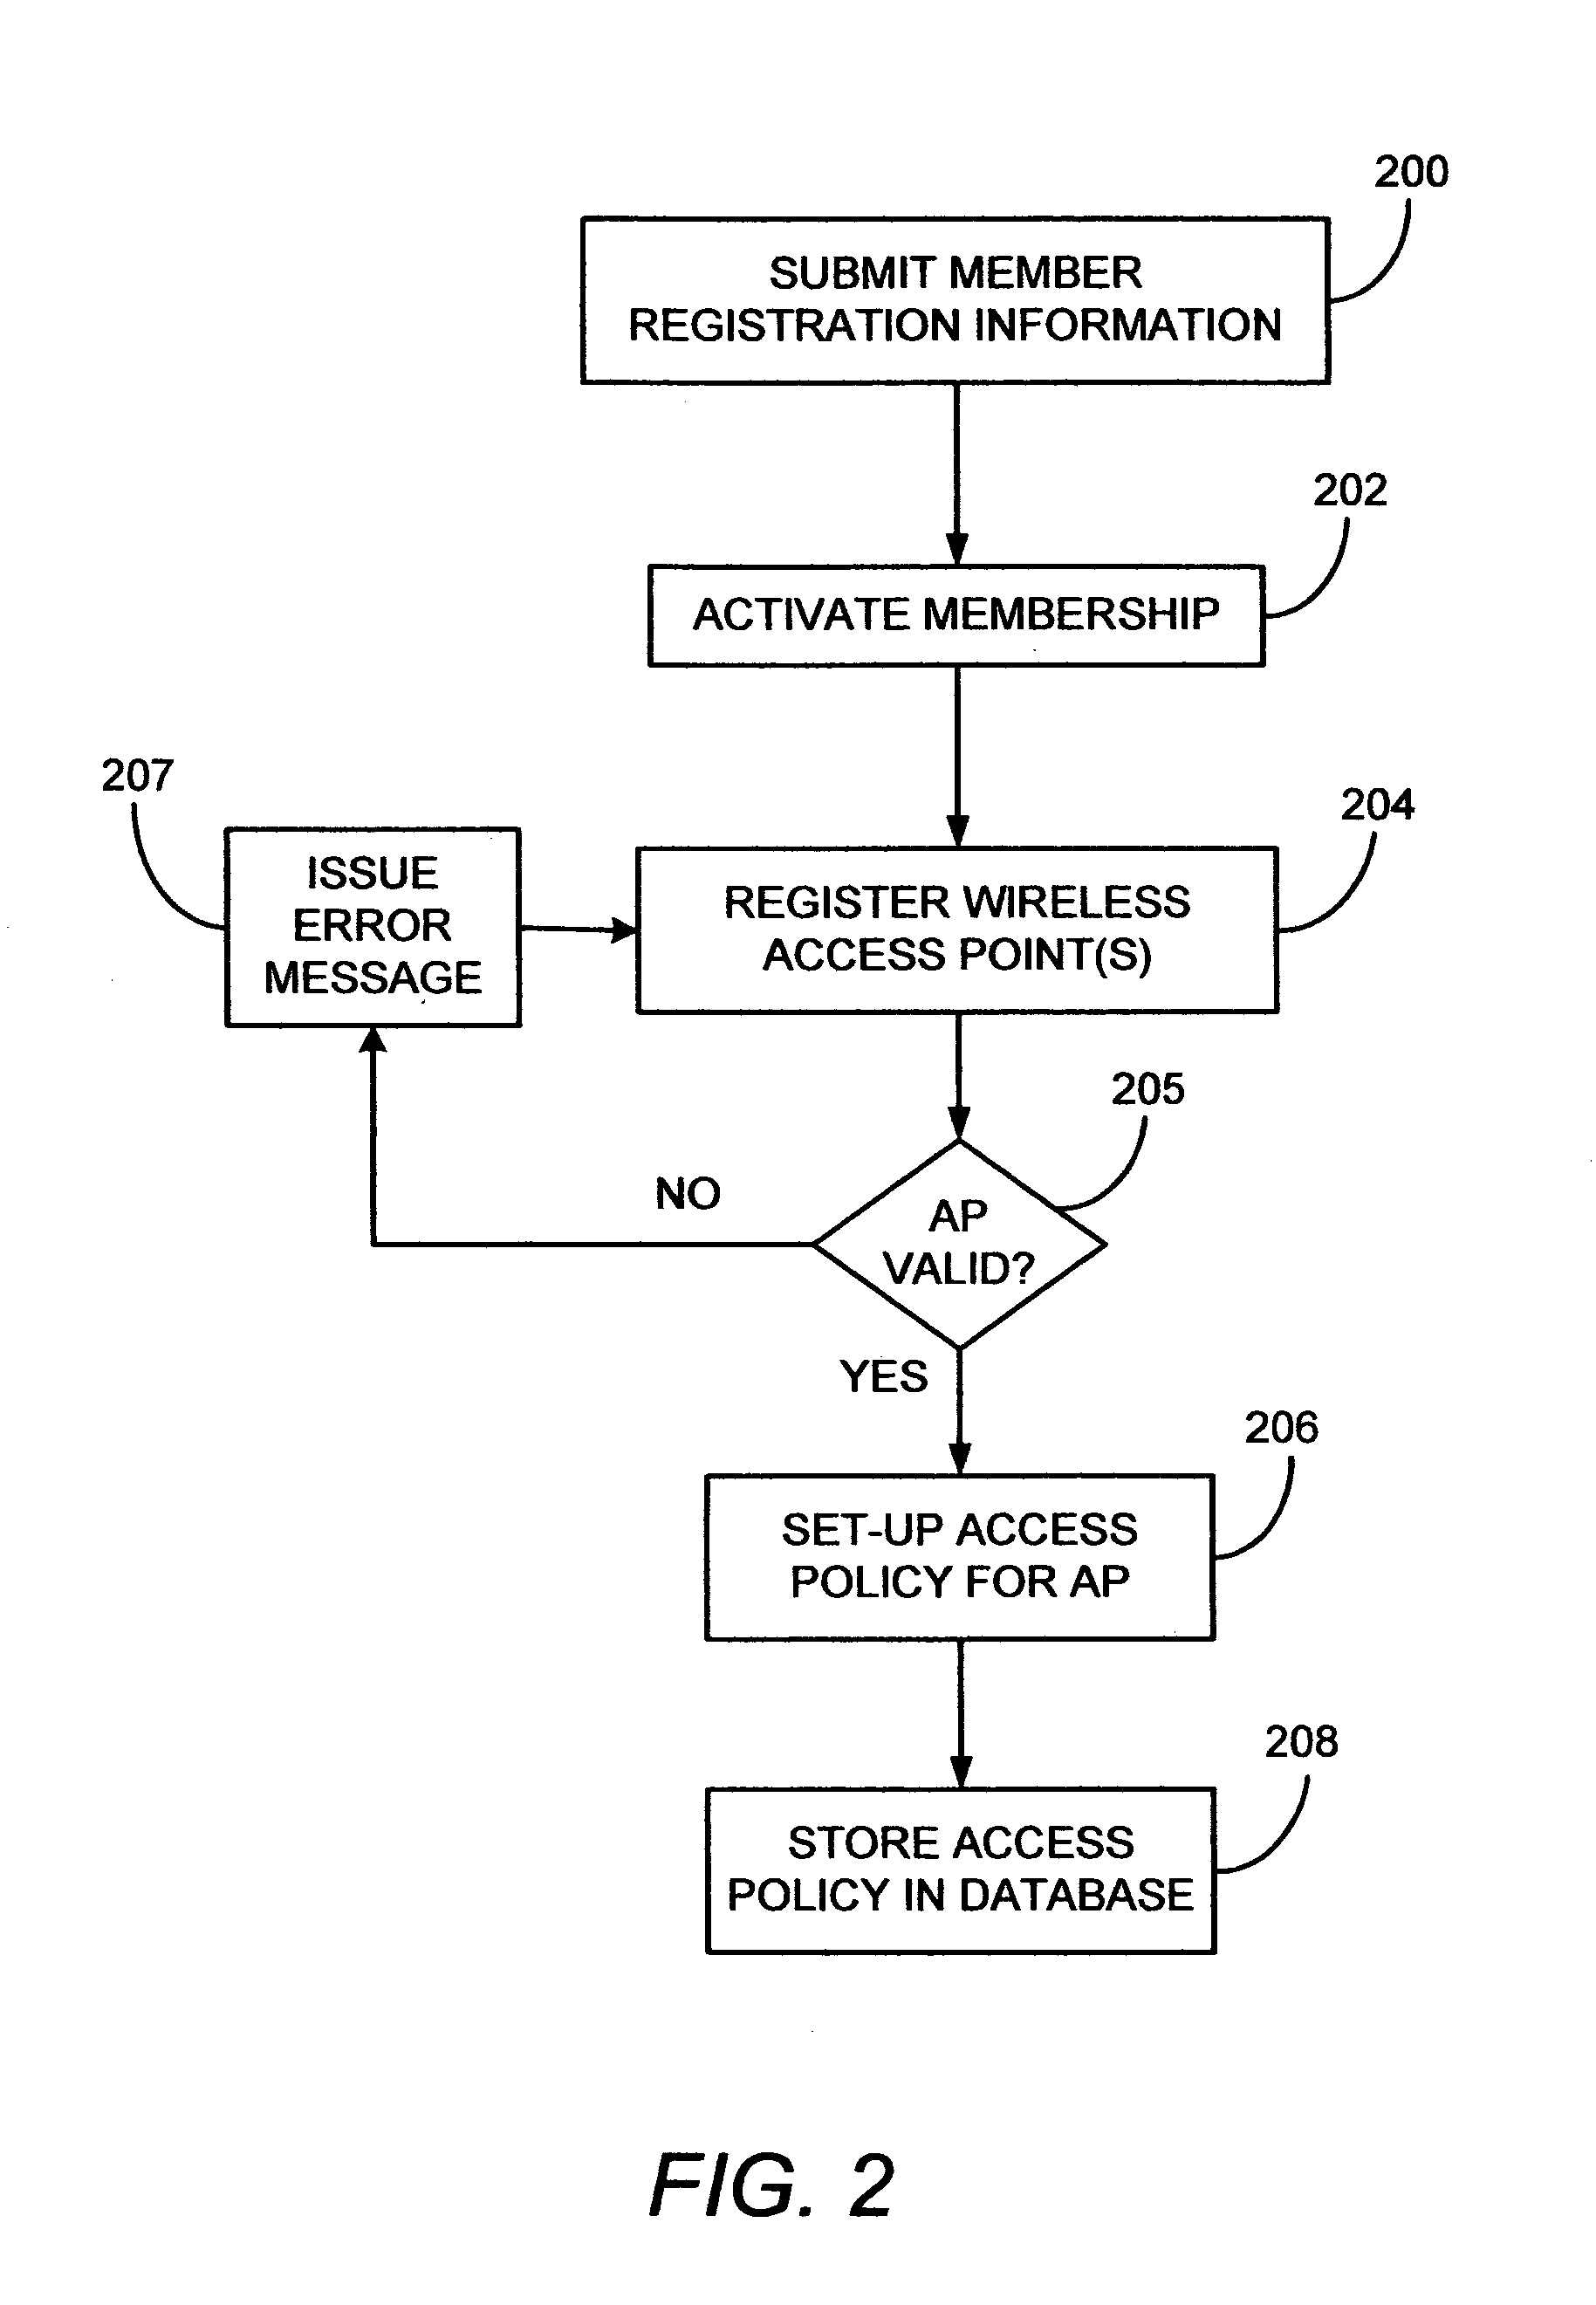 System and method for managing a wireless network community